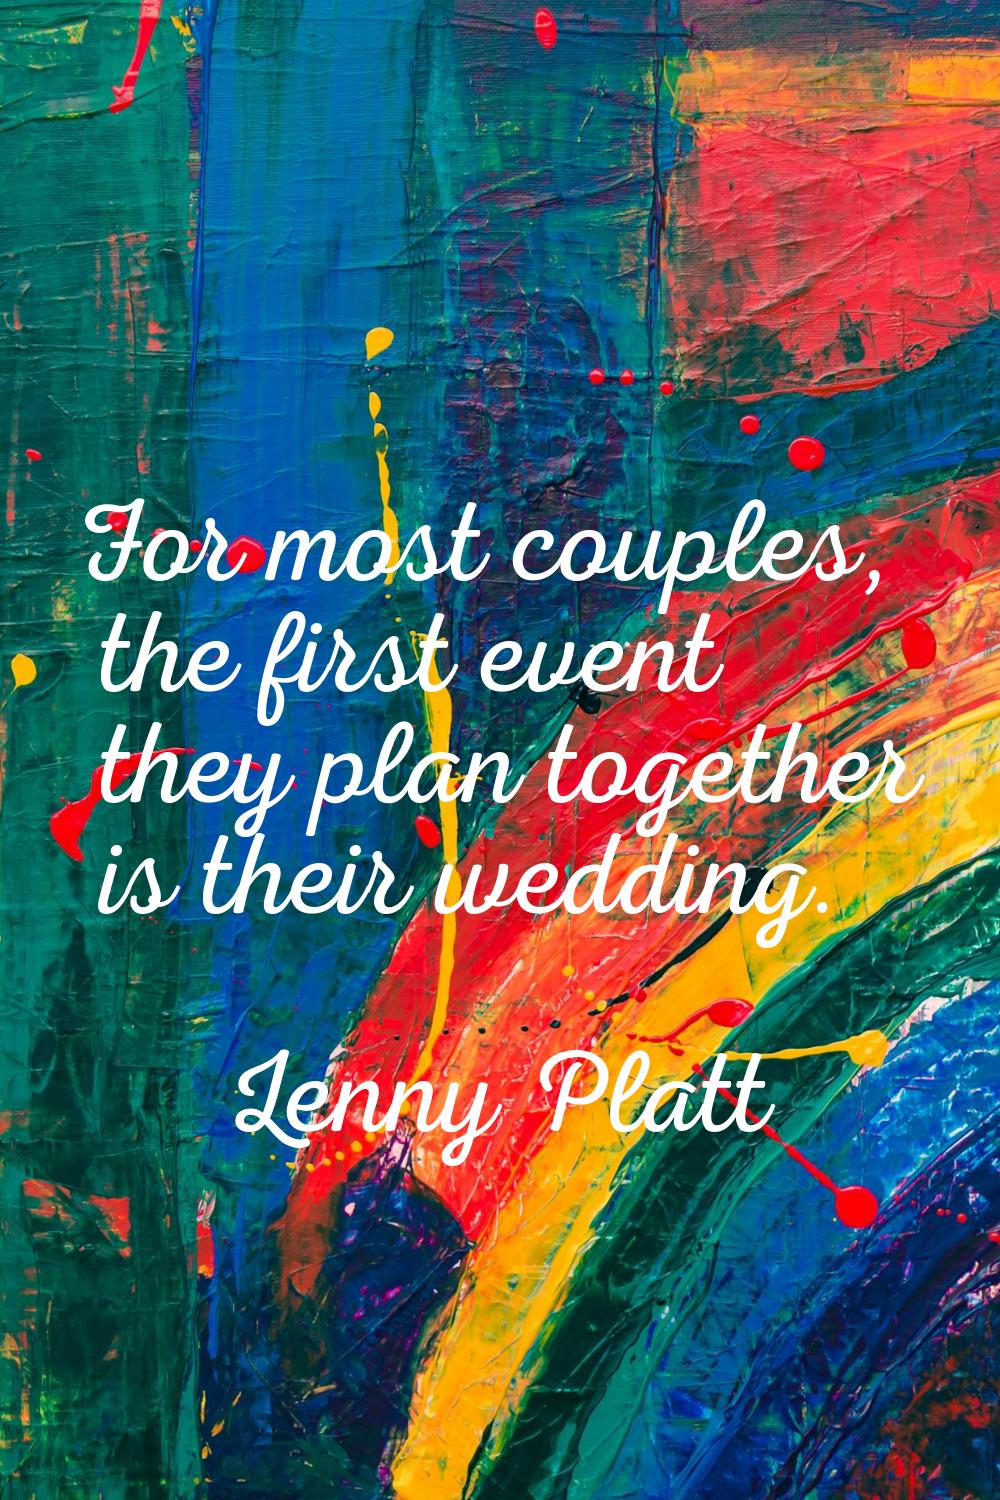 For most couples, the first event they plan together is their wedding.